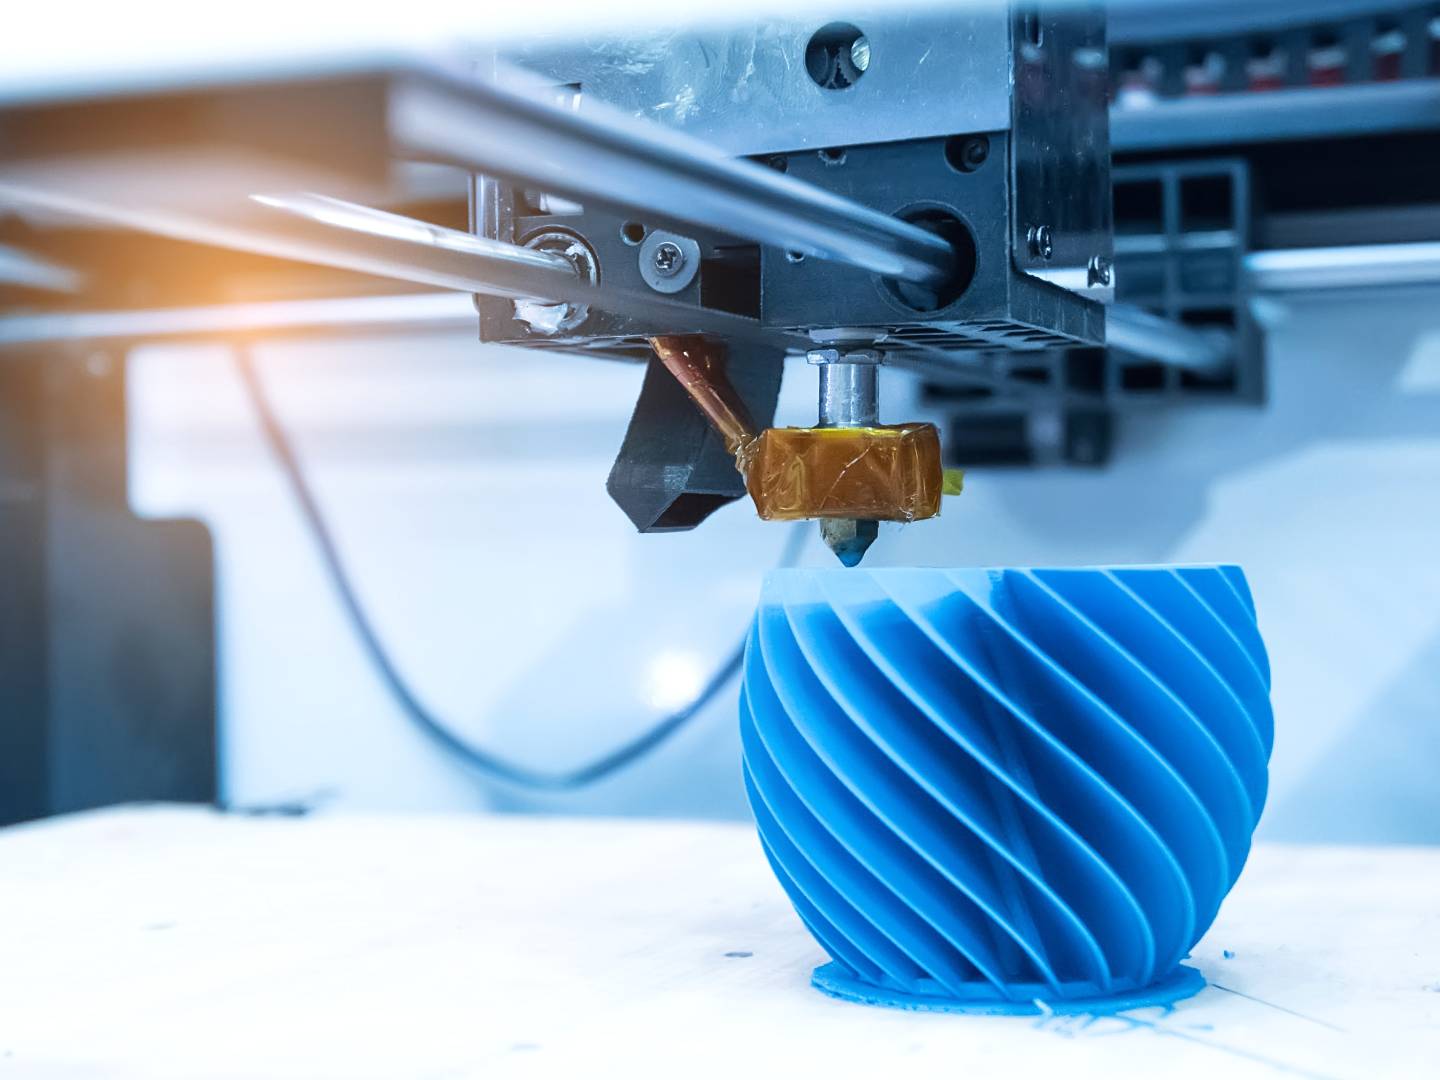 3d-printer-buying-guide-2017-3dprint-the-voice-of-3d-printing